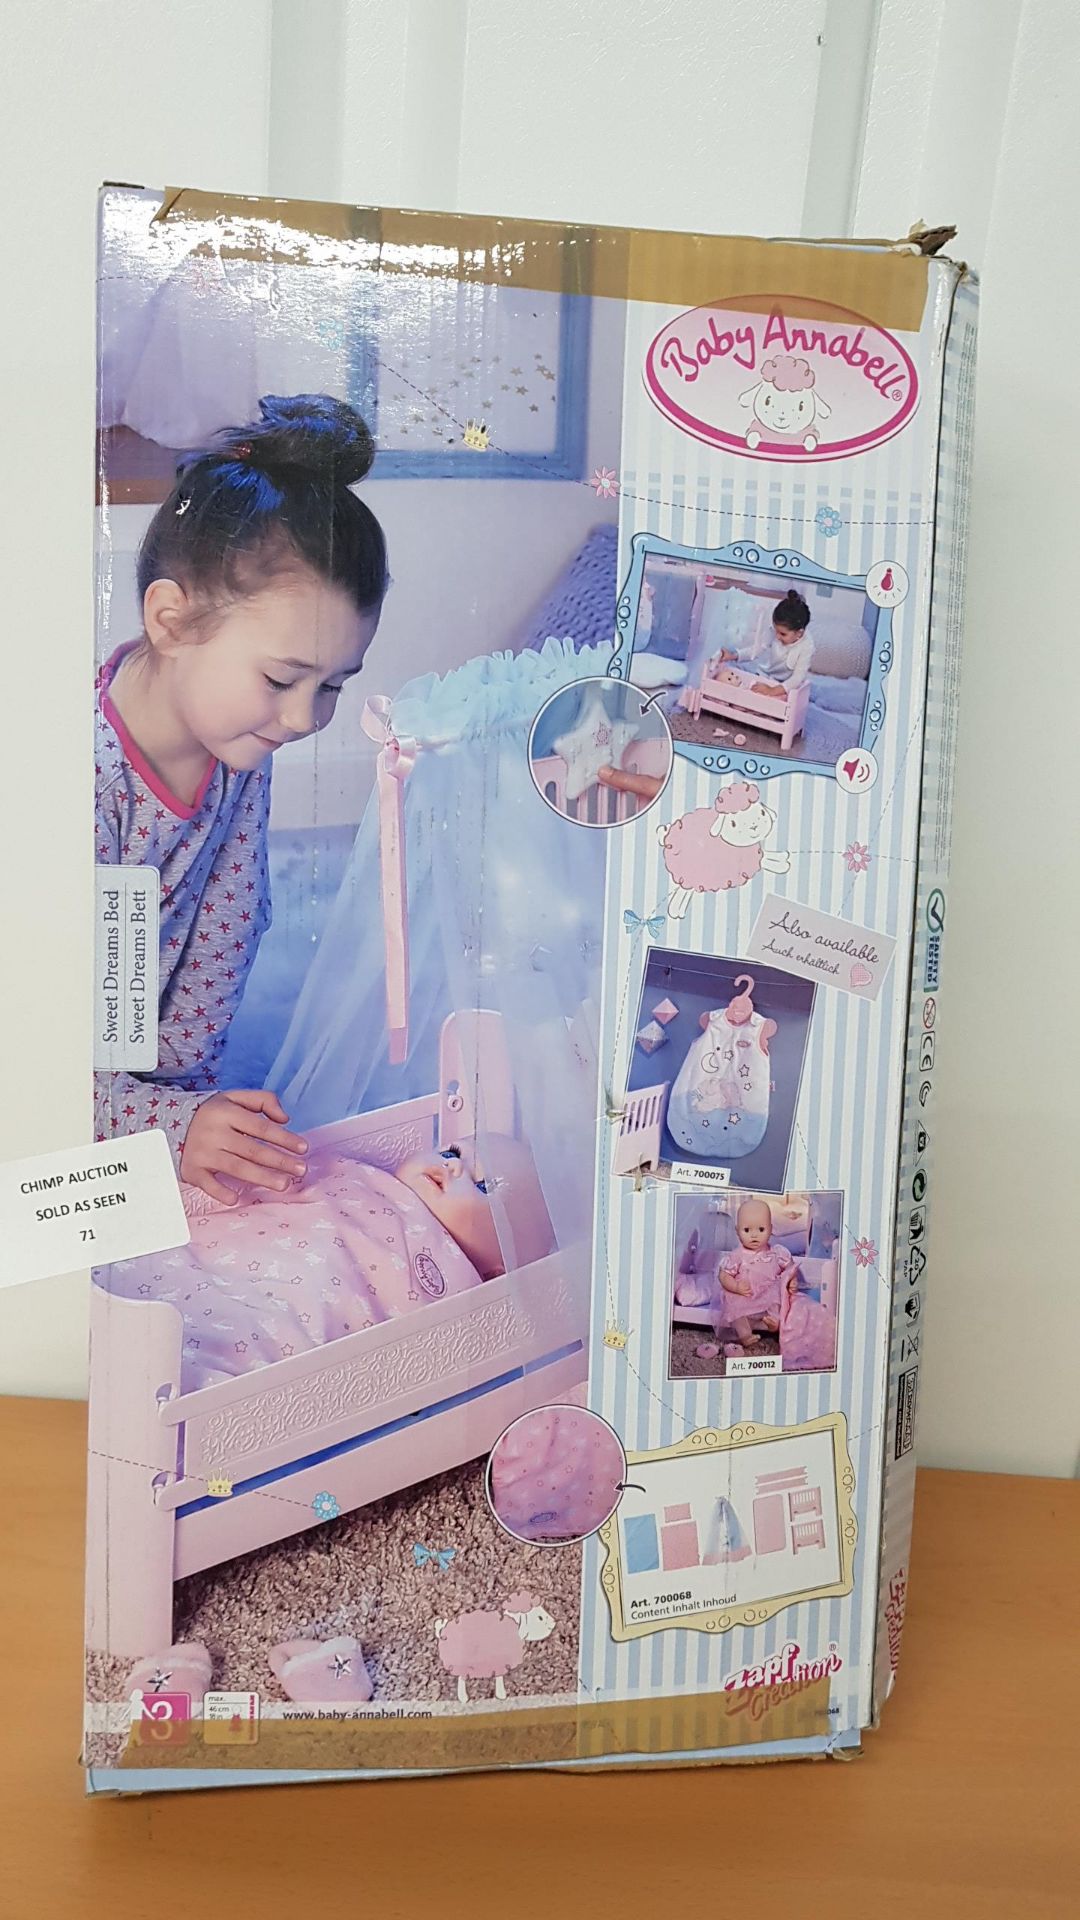 Baby Annabell Sweet dreams doll bed